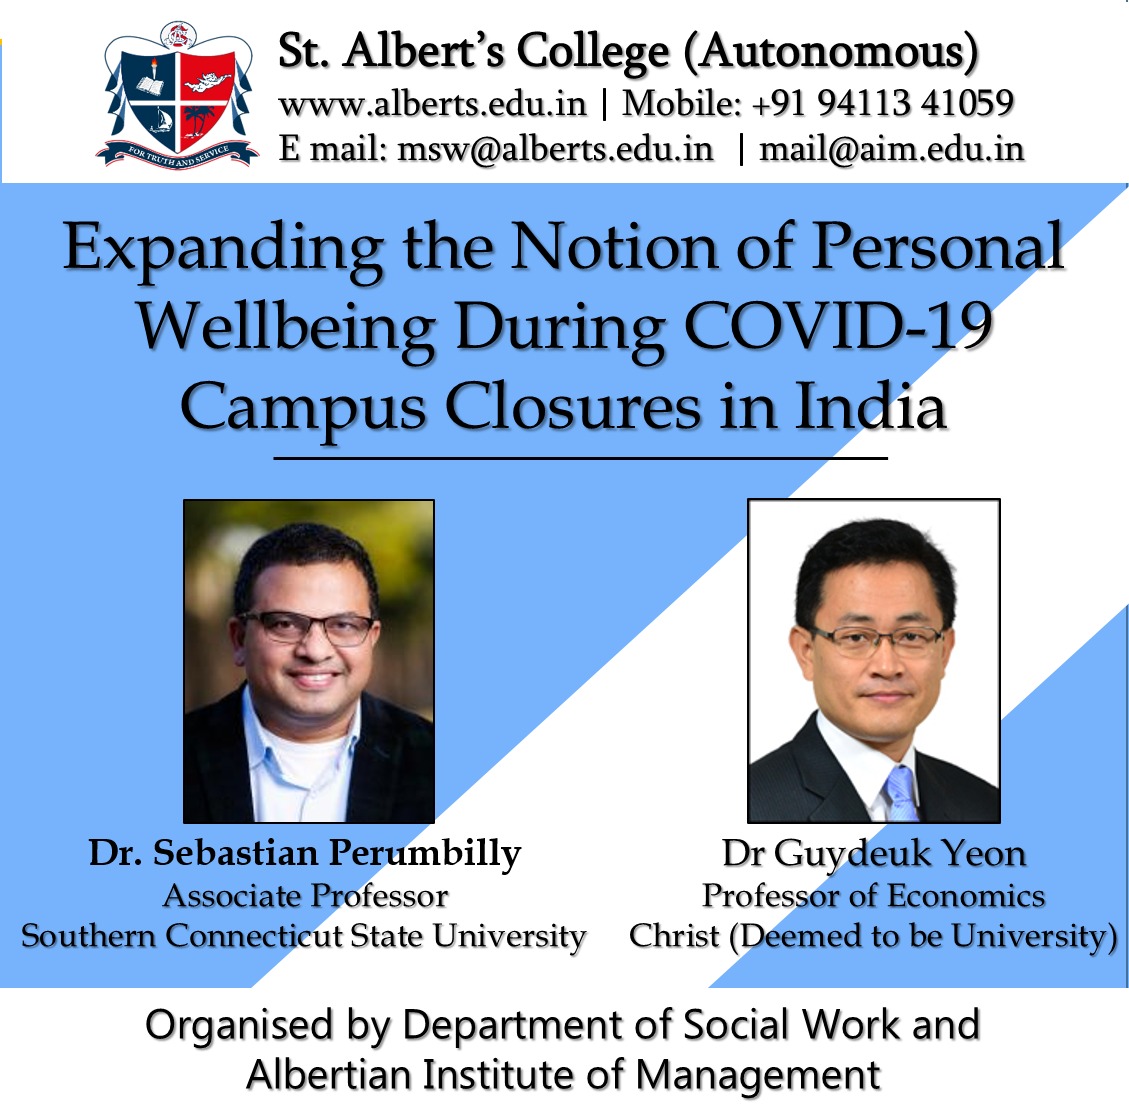 Webinar on Expanding the Notion of Personal Wellbeing During COVID-19 Campus Closures in India